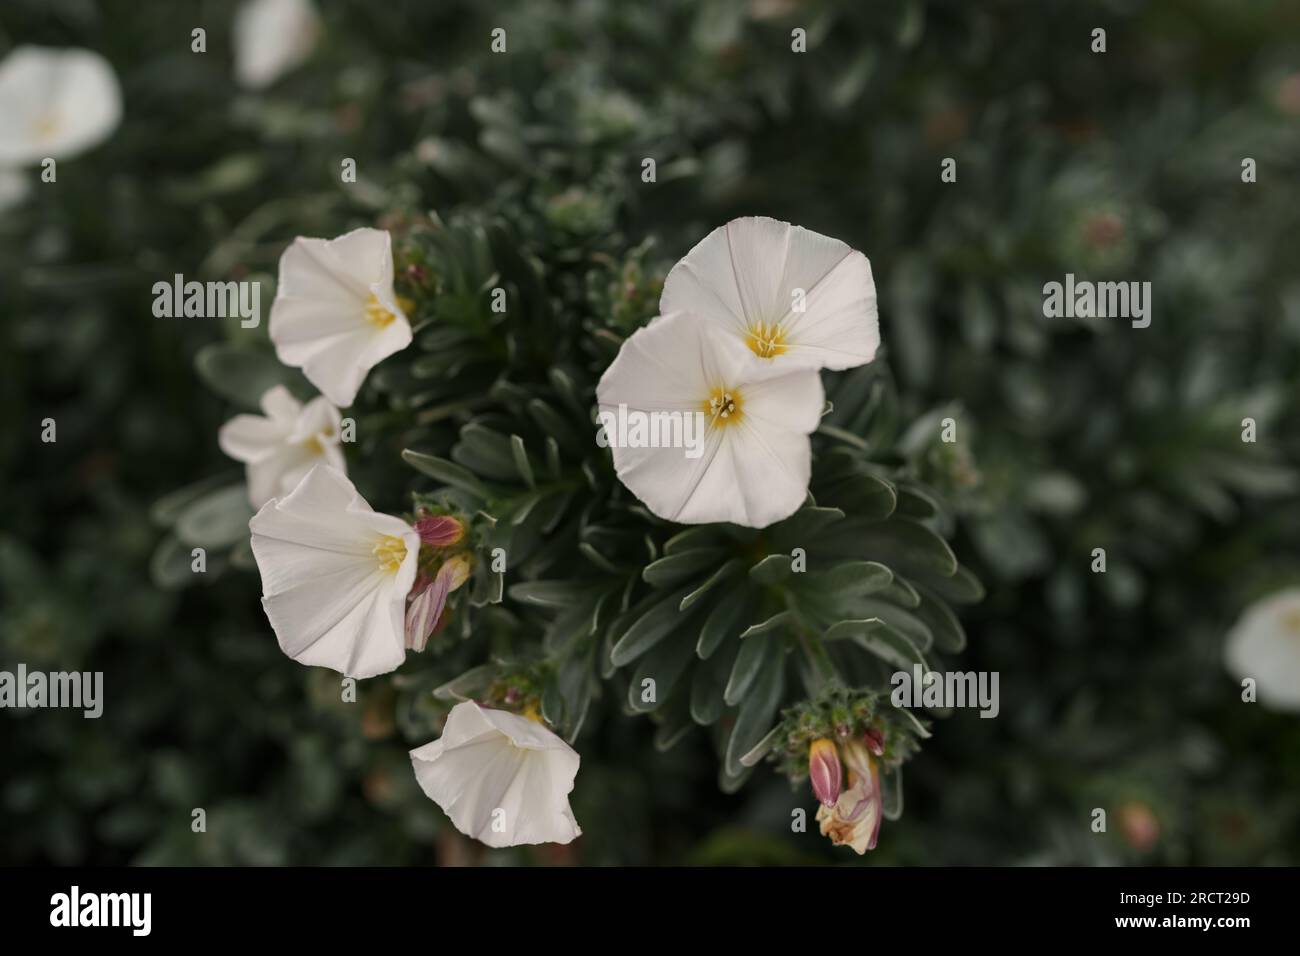 Blossoming Shrubby bindweed also called Convolvulus cneorum closeup photo, shallow focus Stock Photo